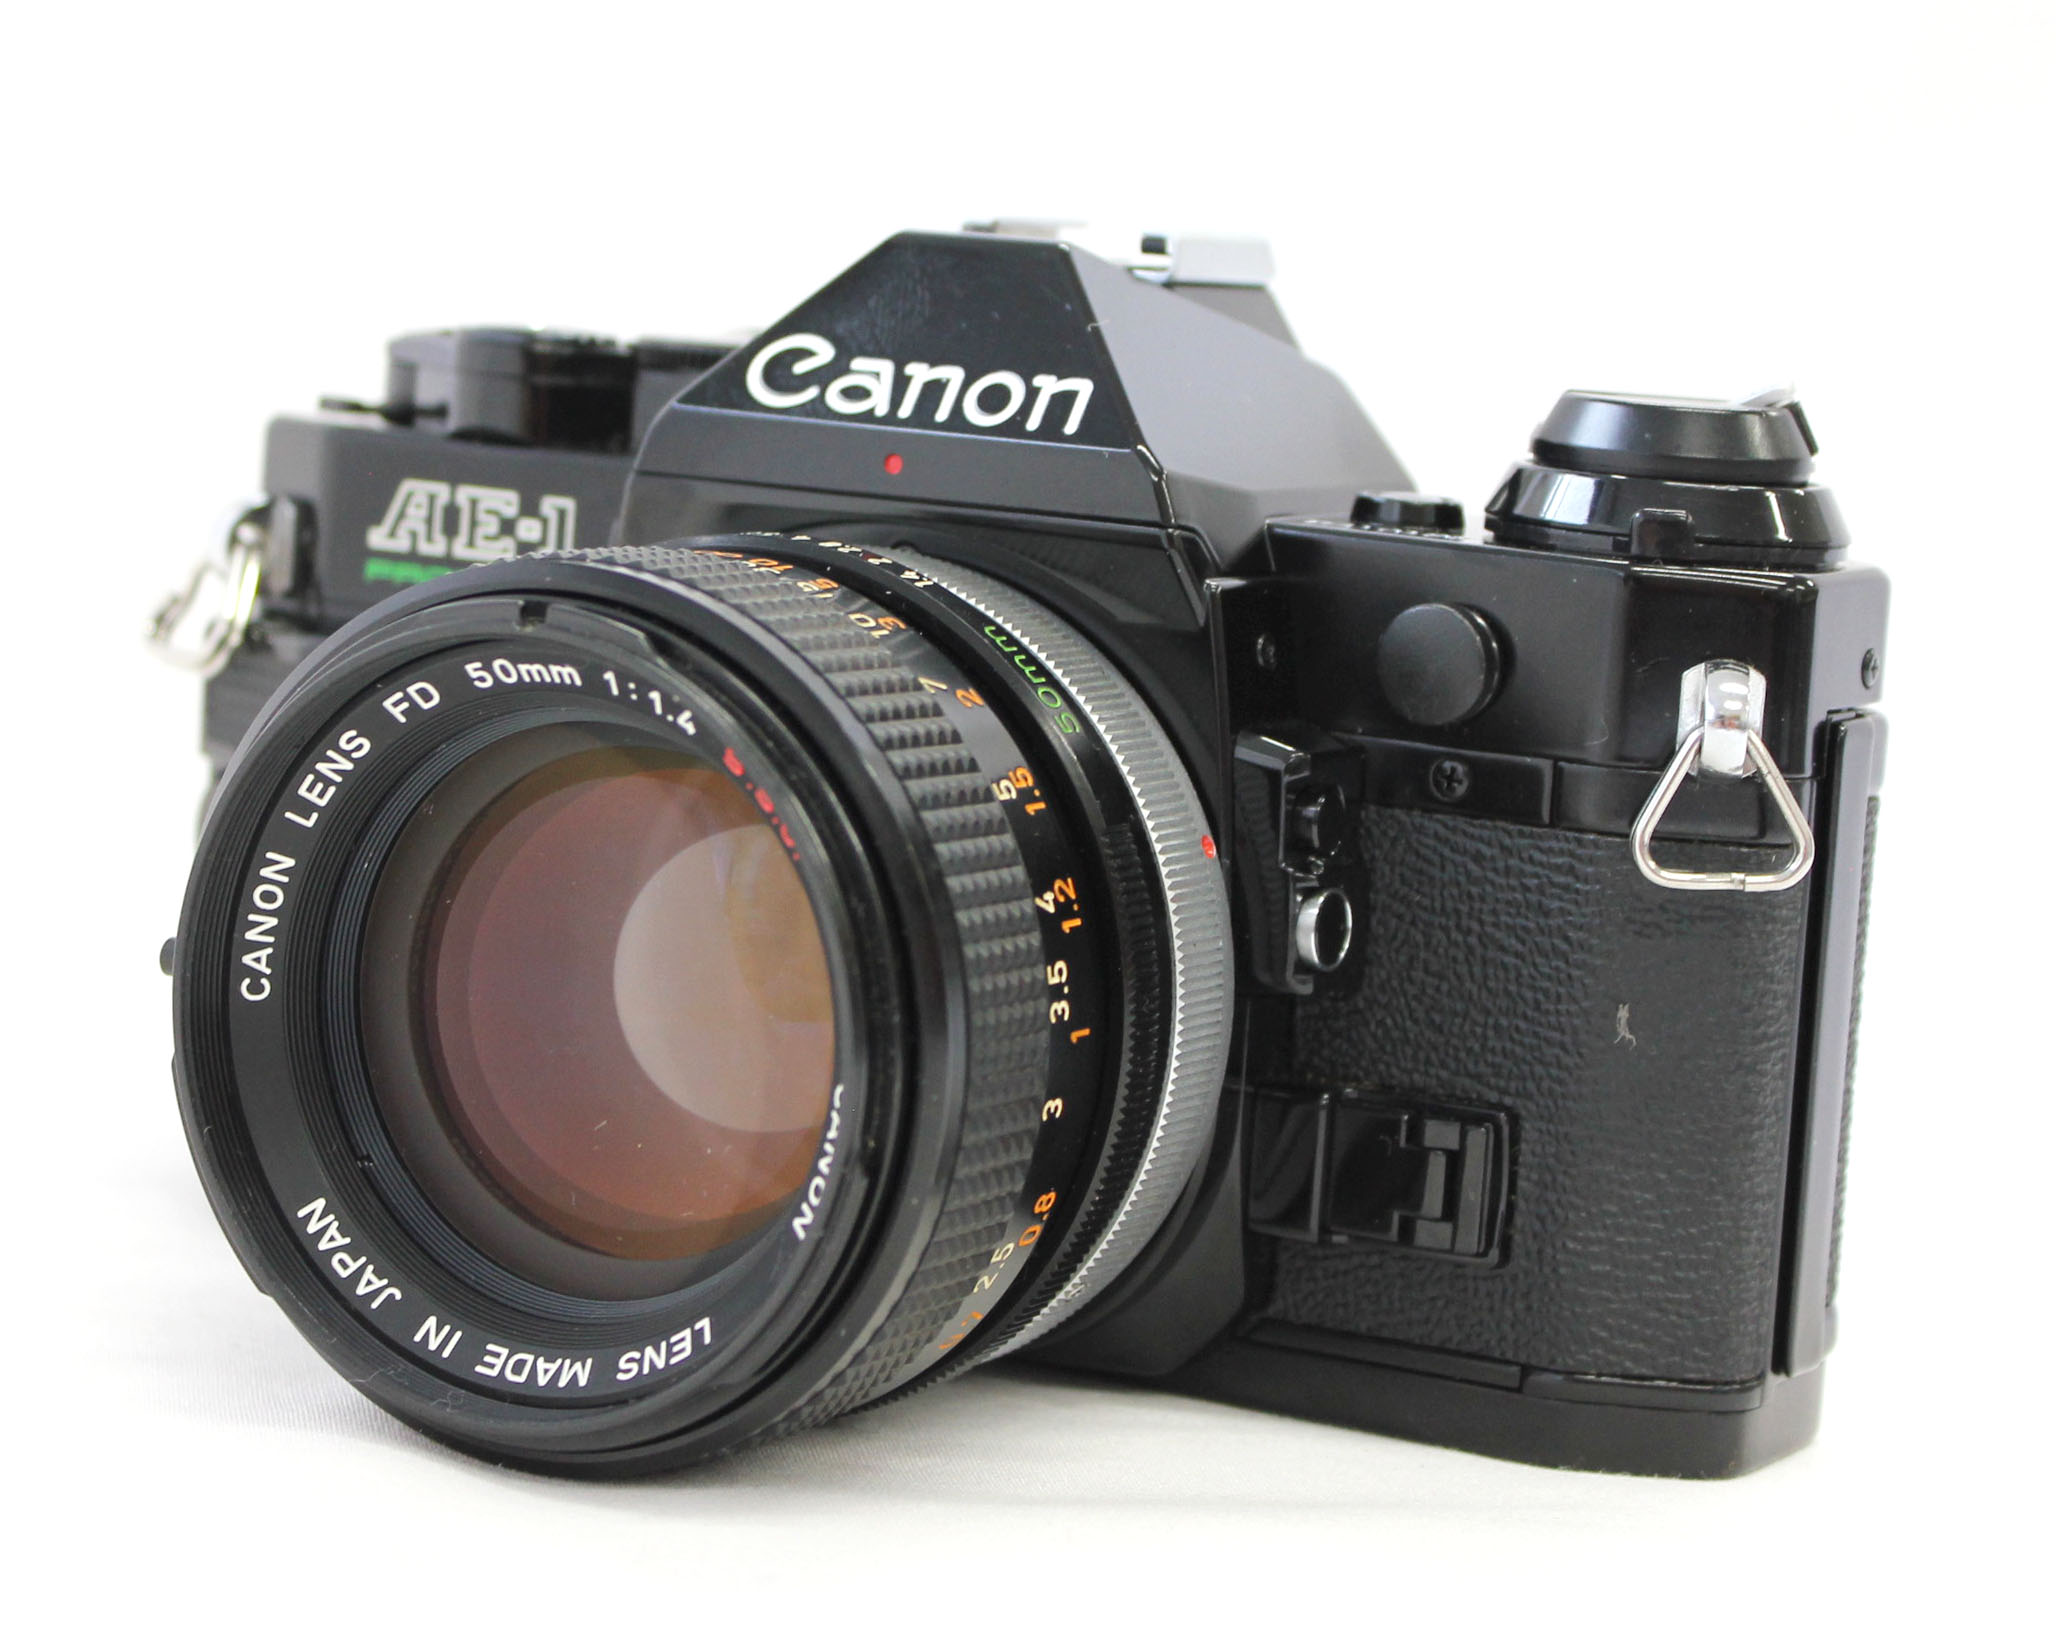 Japan Used Camera Shop | [Excellent+++++] Canon AE-1 Program 35mm SLR Film Camera Black with FD 50mm F/1.4 S.S.C. Rare "O" Lens from Japan